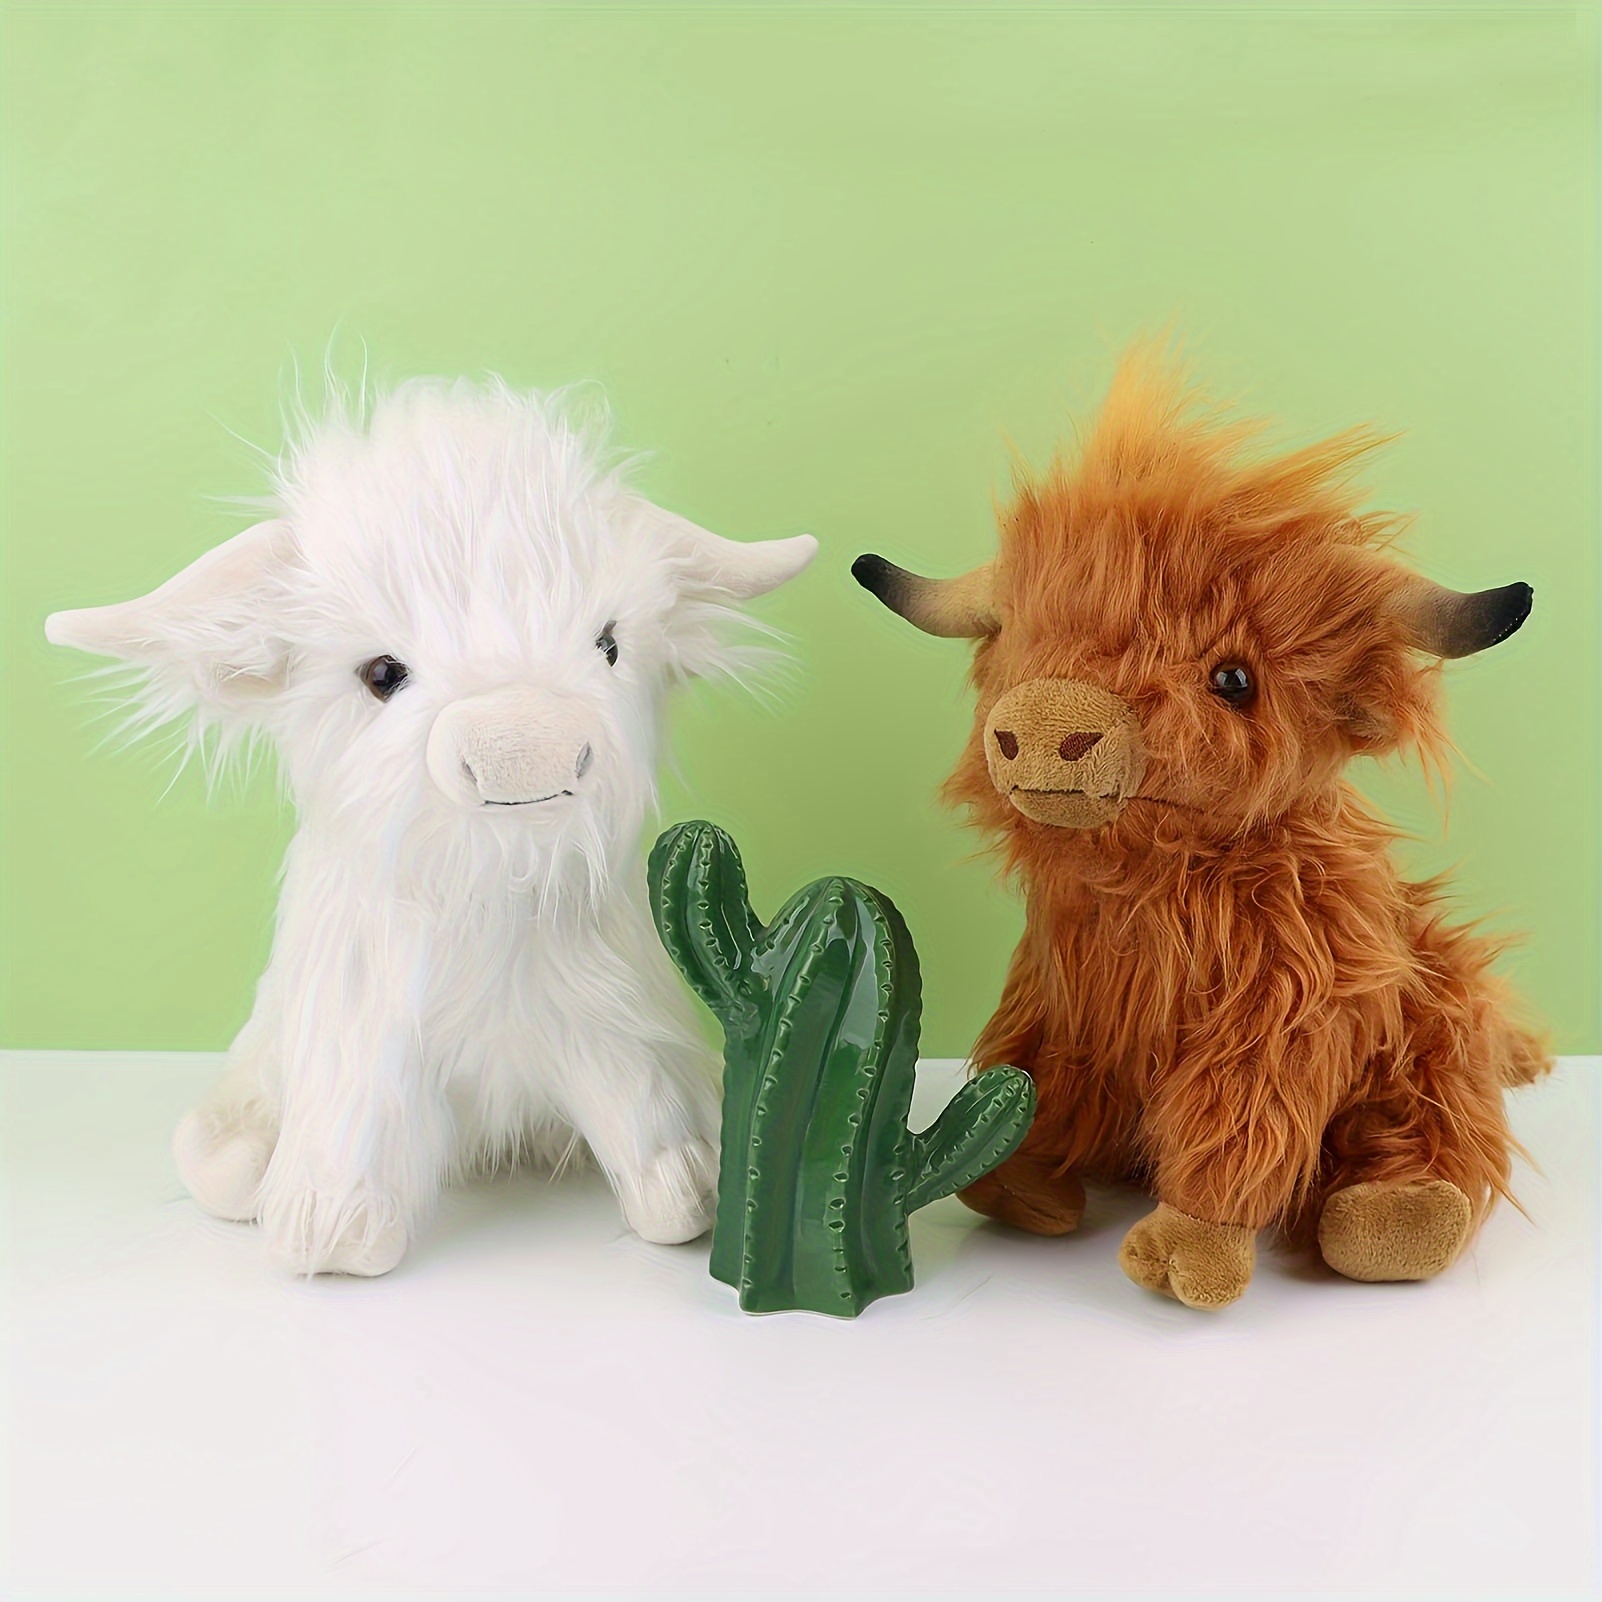 

27cm/10.63in Highland Cow Plush Toy Soft Stuffed Doll Cute Highland Cattle Cow Plush Pillow For Friends Fans Christmas Gift Holiday Gifts